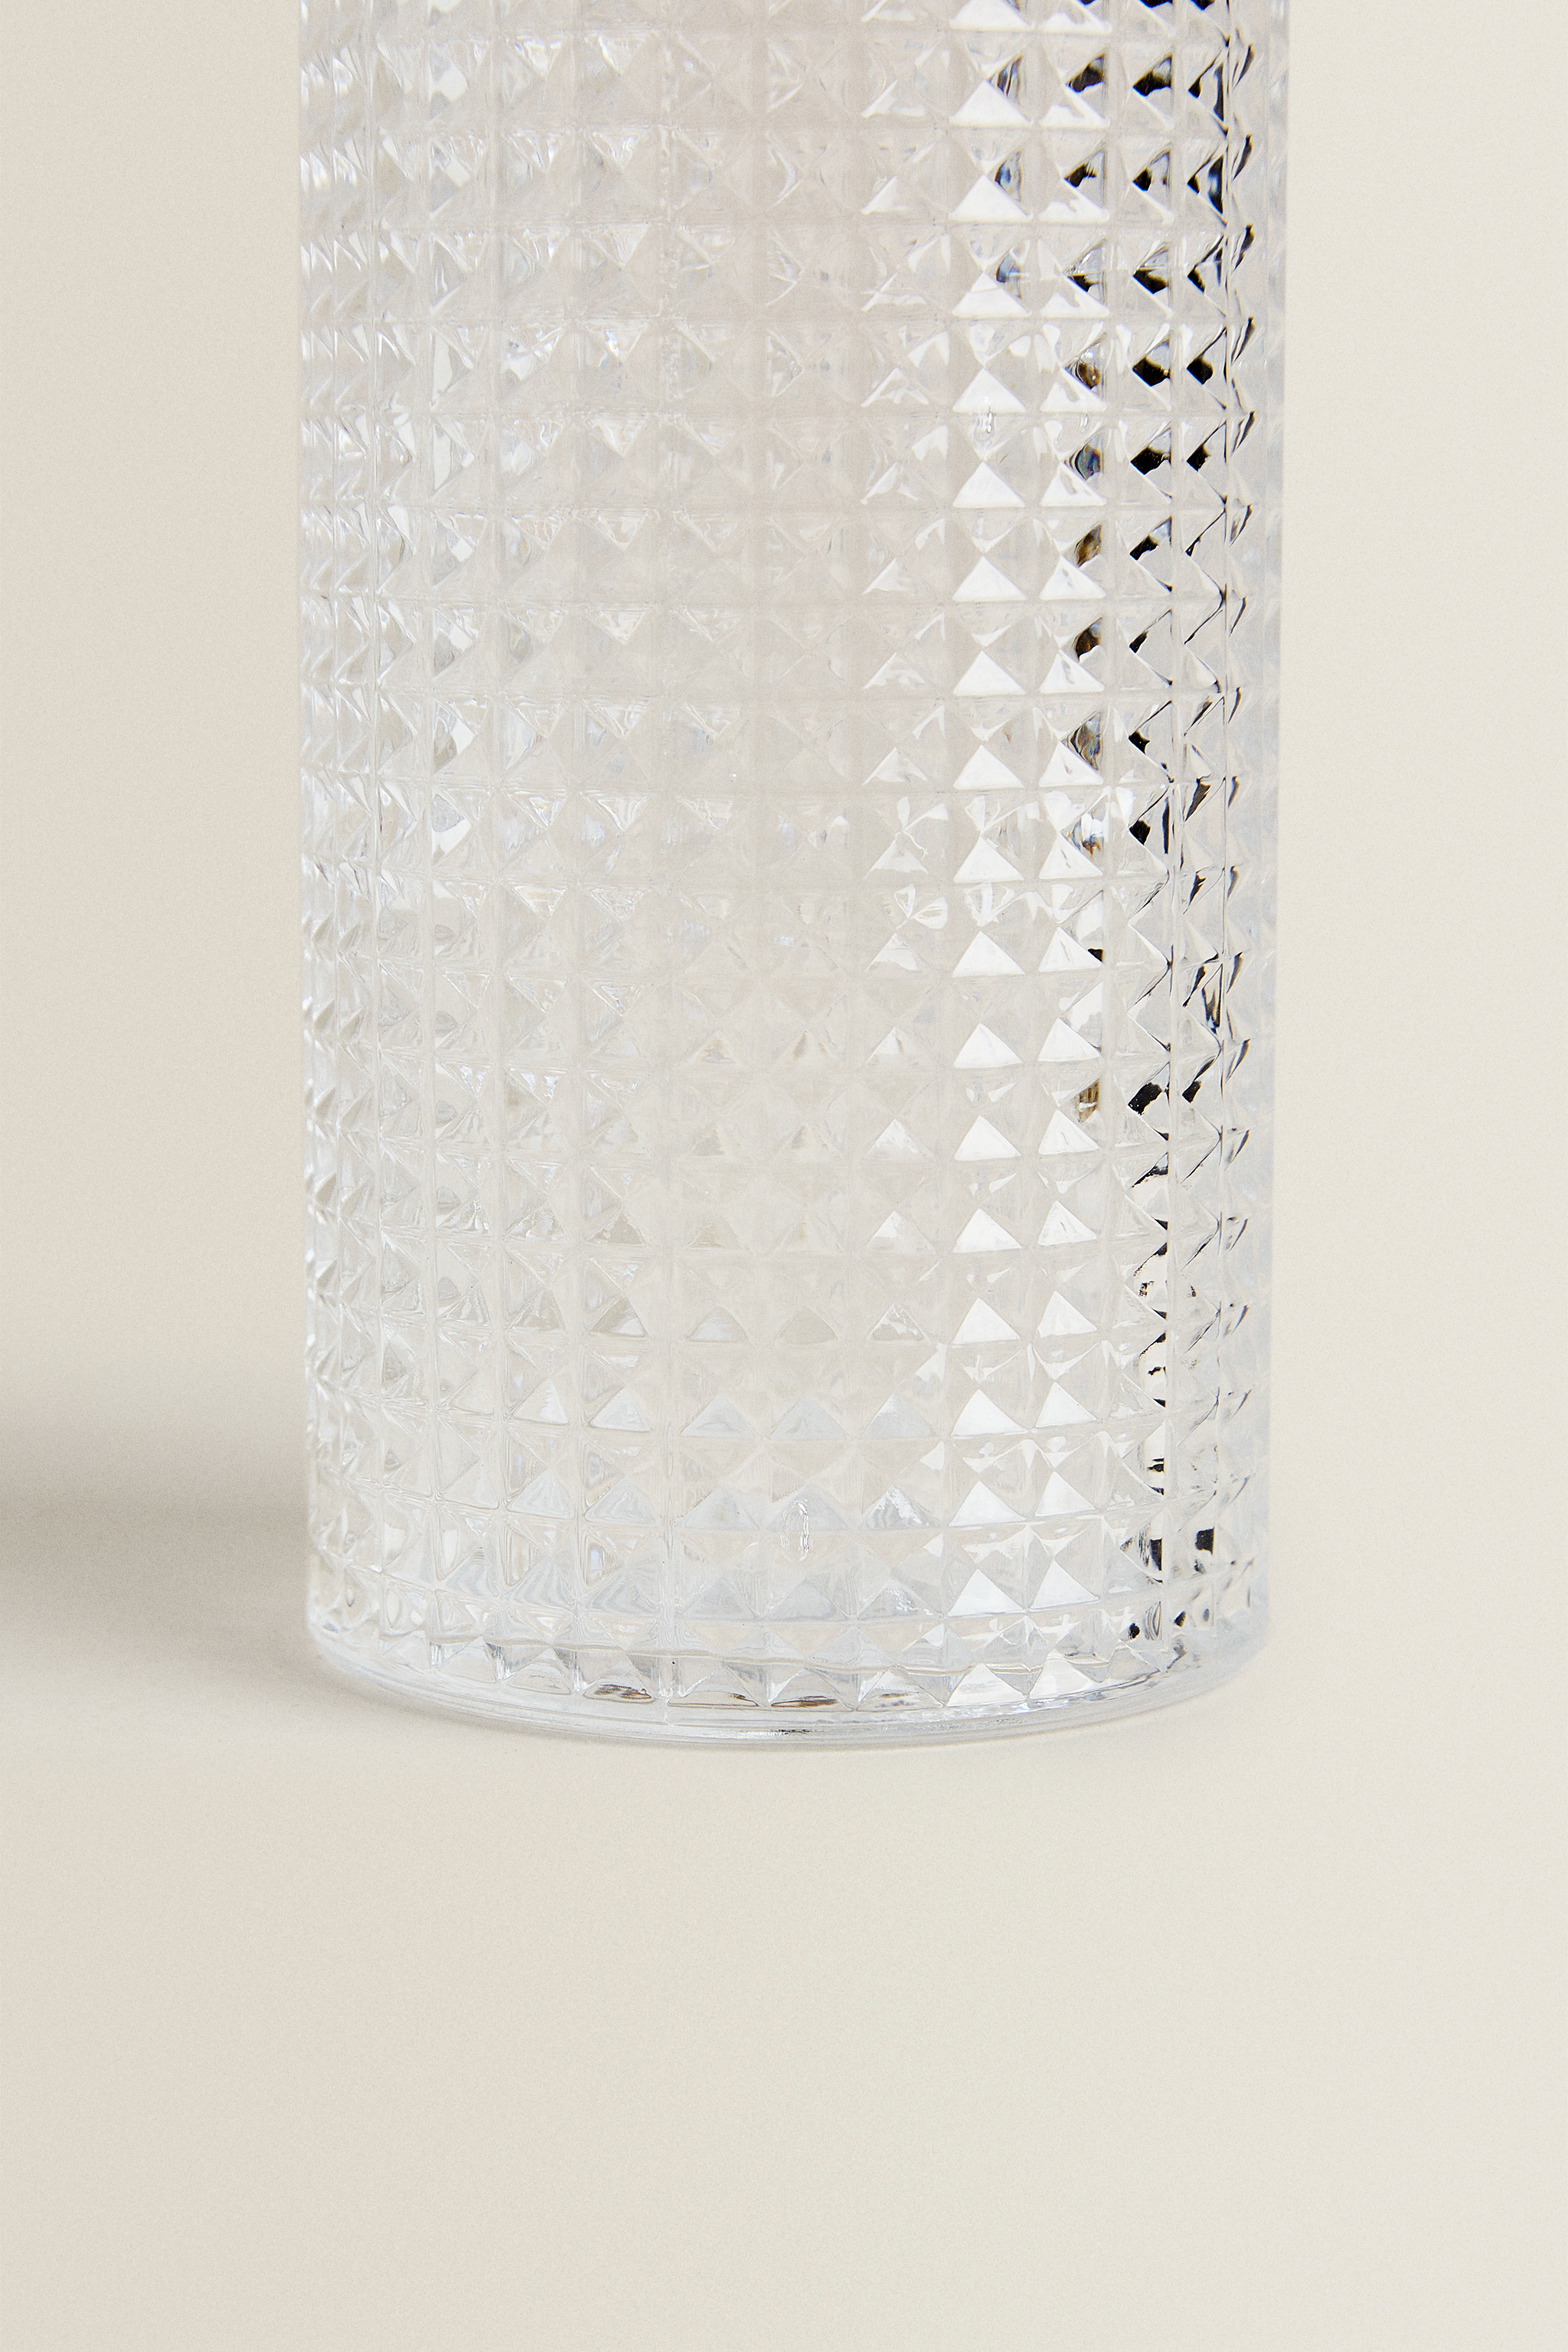 GLASS BOTTLE WITH RELIEF DESIGN